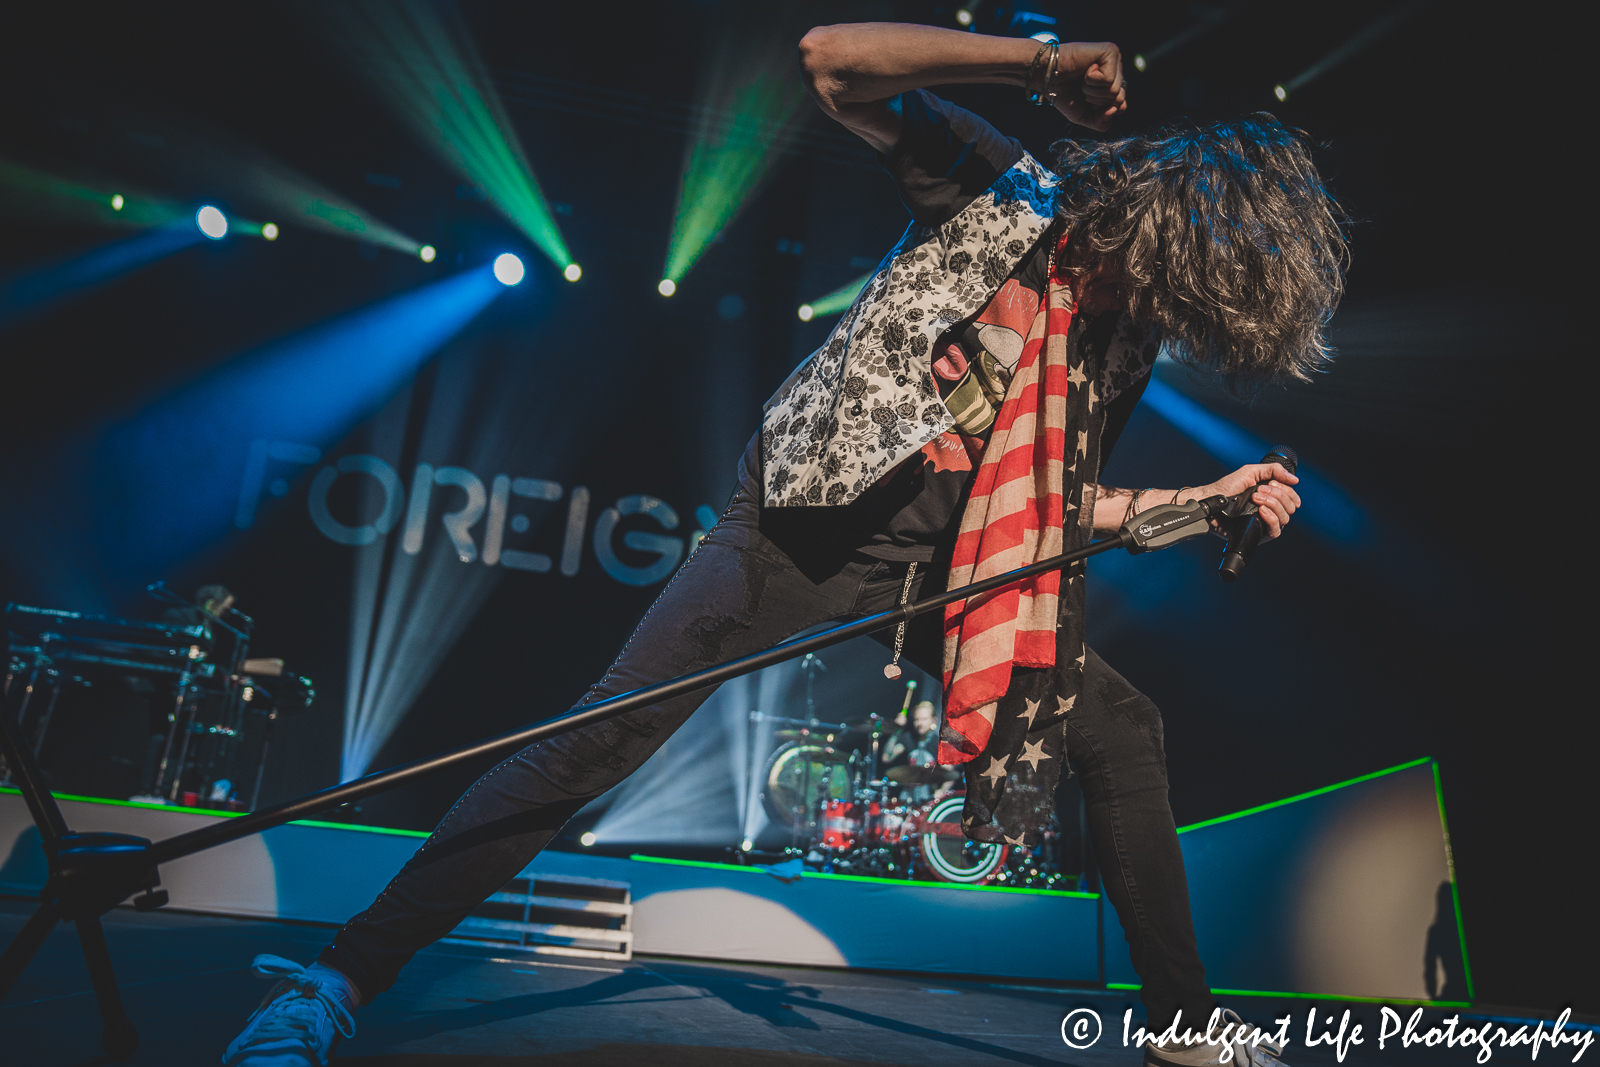 Lead vocalist Kelly Hansen of Foreigner performing "Cold as Ice" live at Hartman Arena in Park City, KS on April 30, 2023.